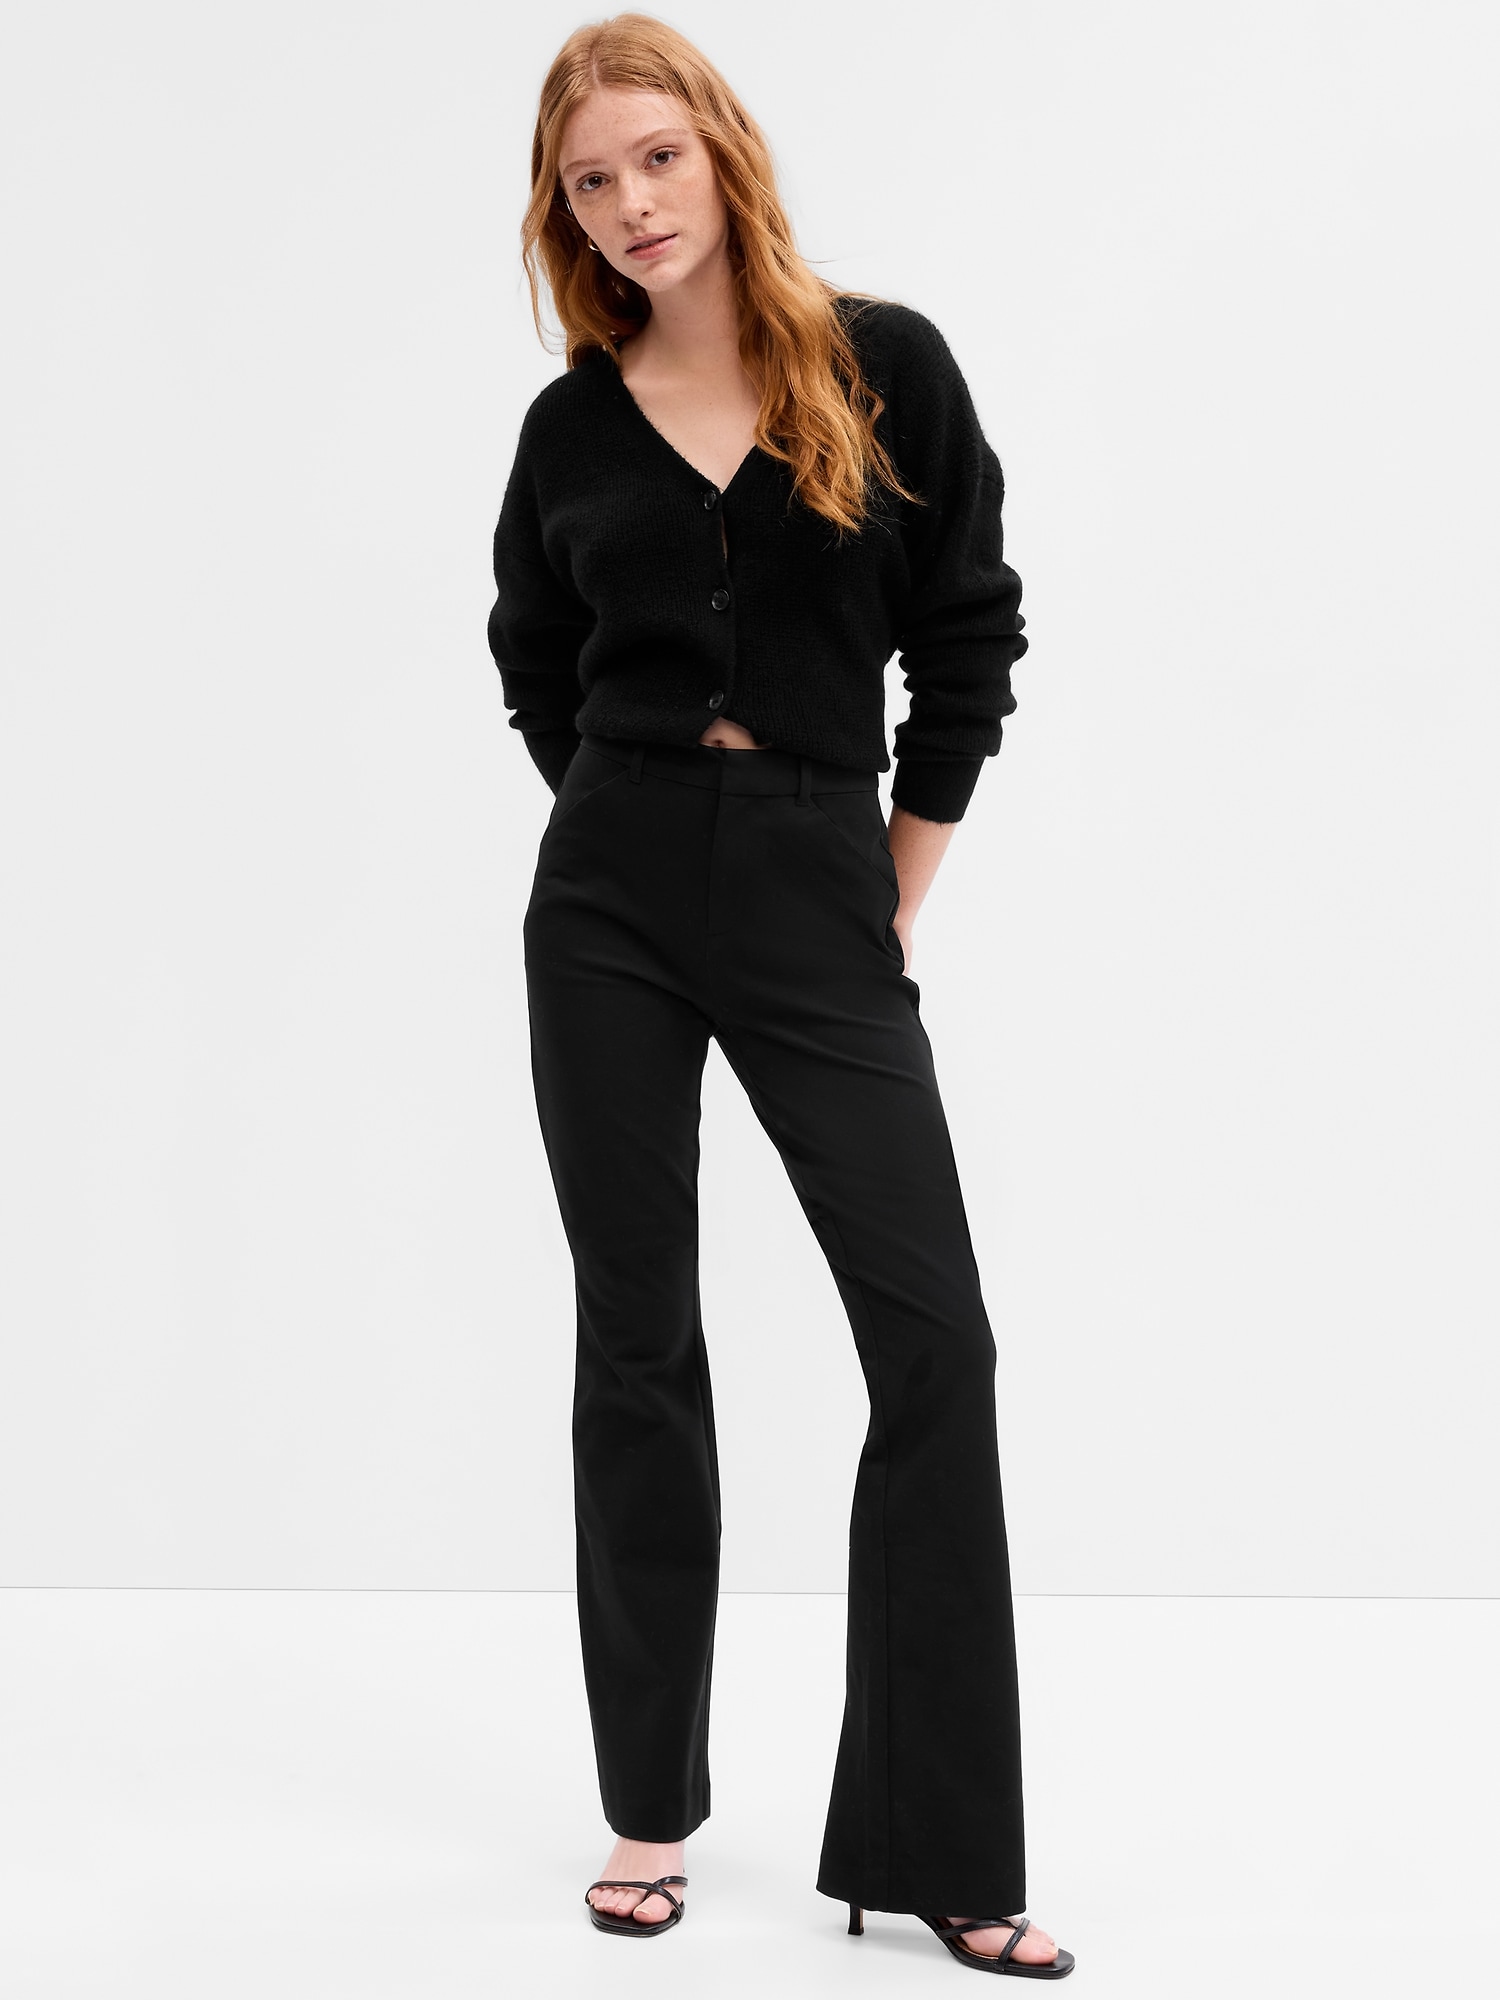  Other Stories stretch high waist wide leg pants with zip details in black